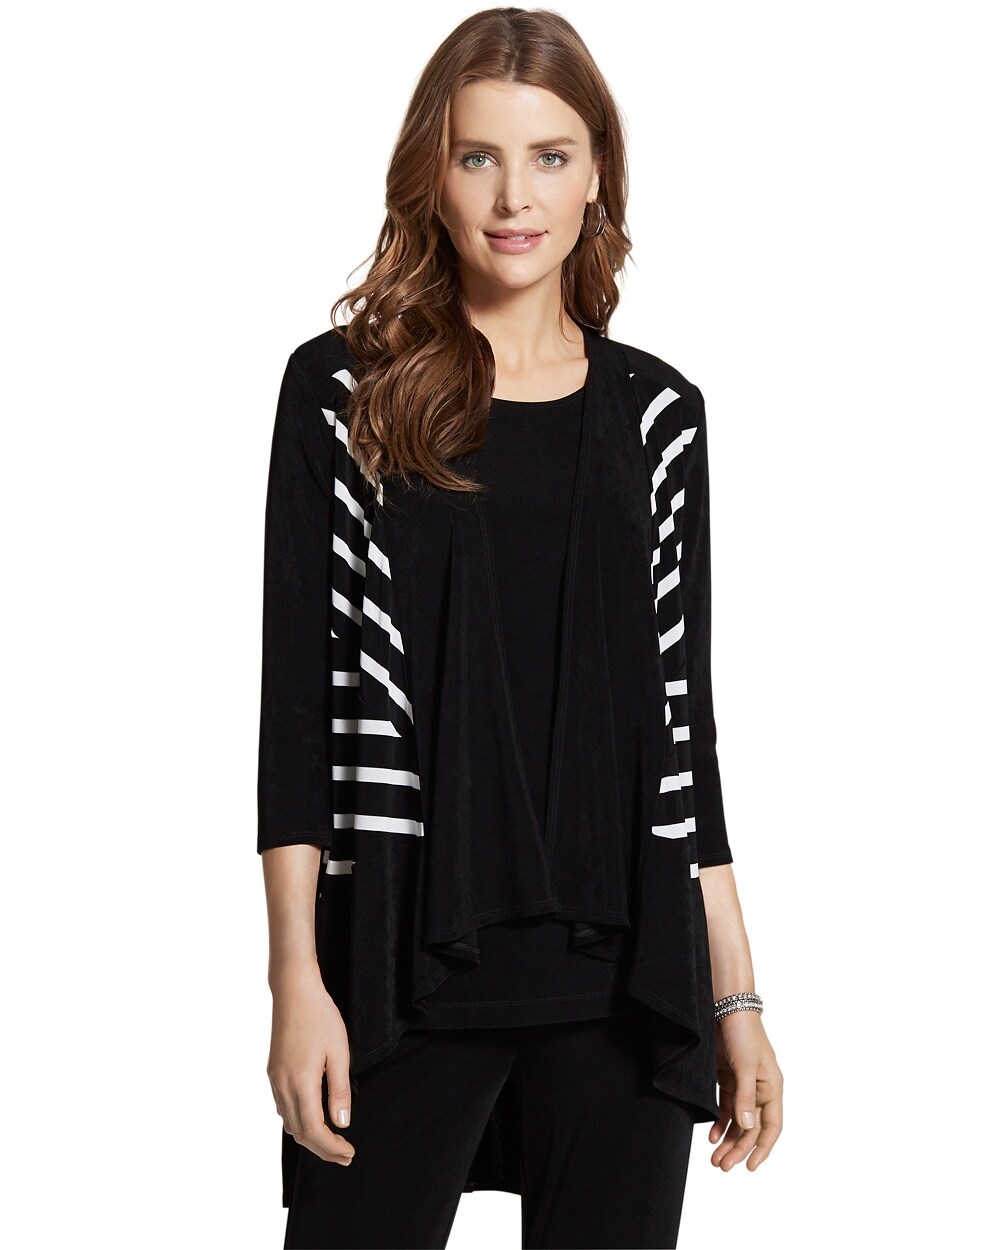 Travelers Classic Striped Jacket